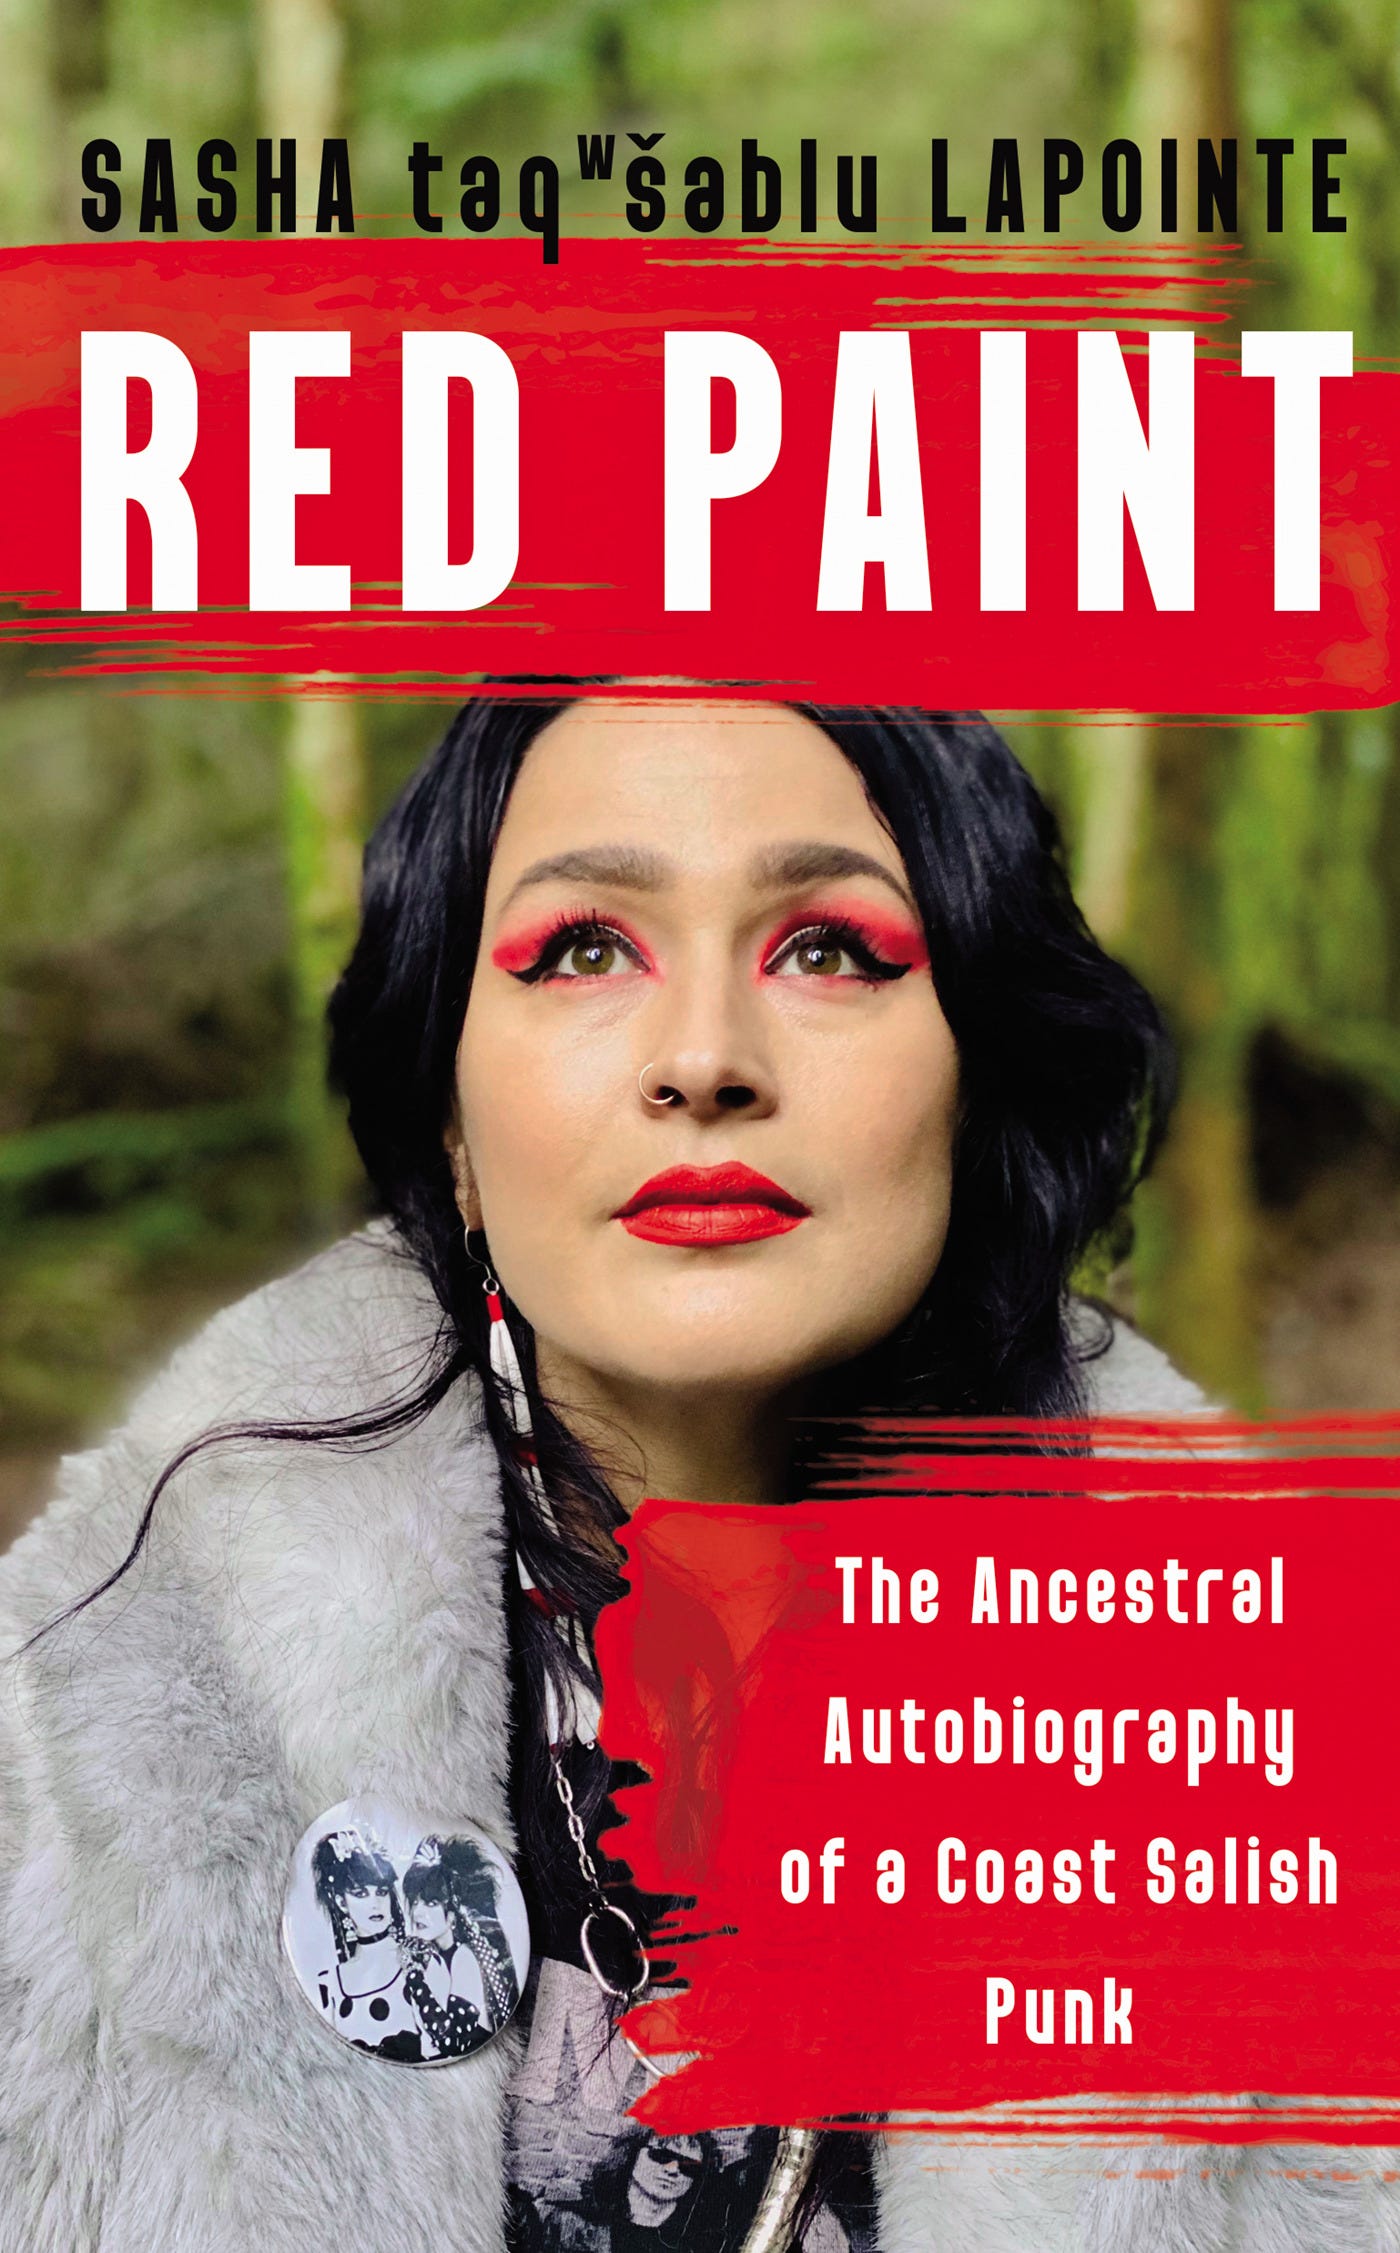 Image shows the cover of Sasha taqwšəblu LaPointe's Red Paint